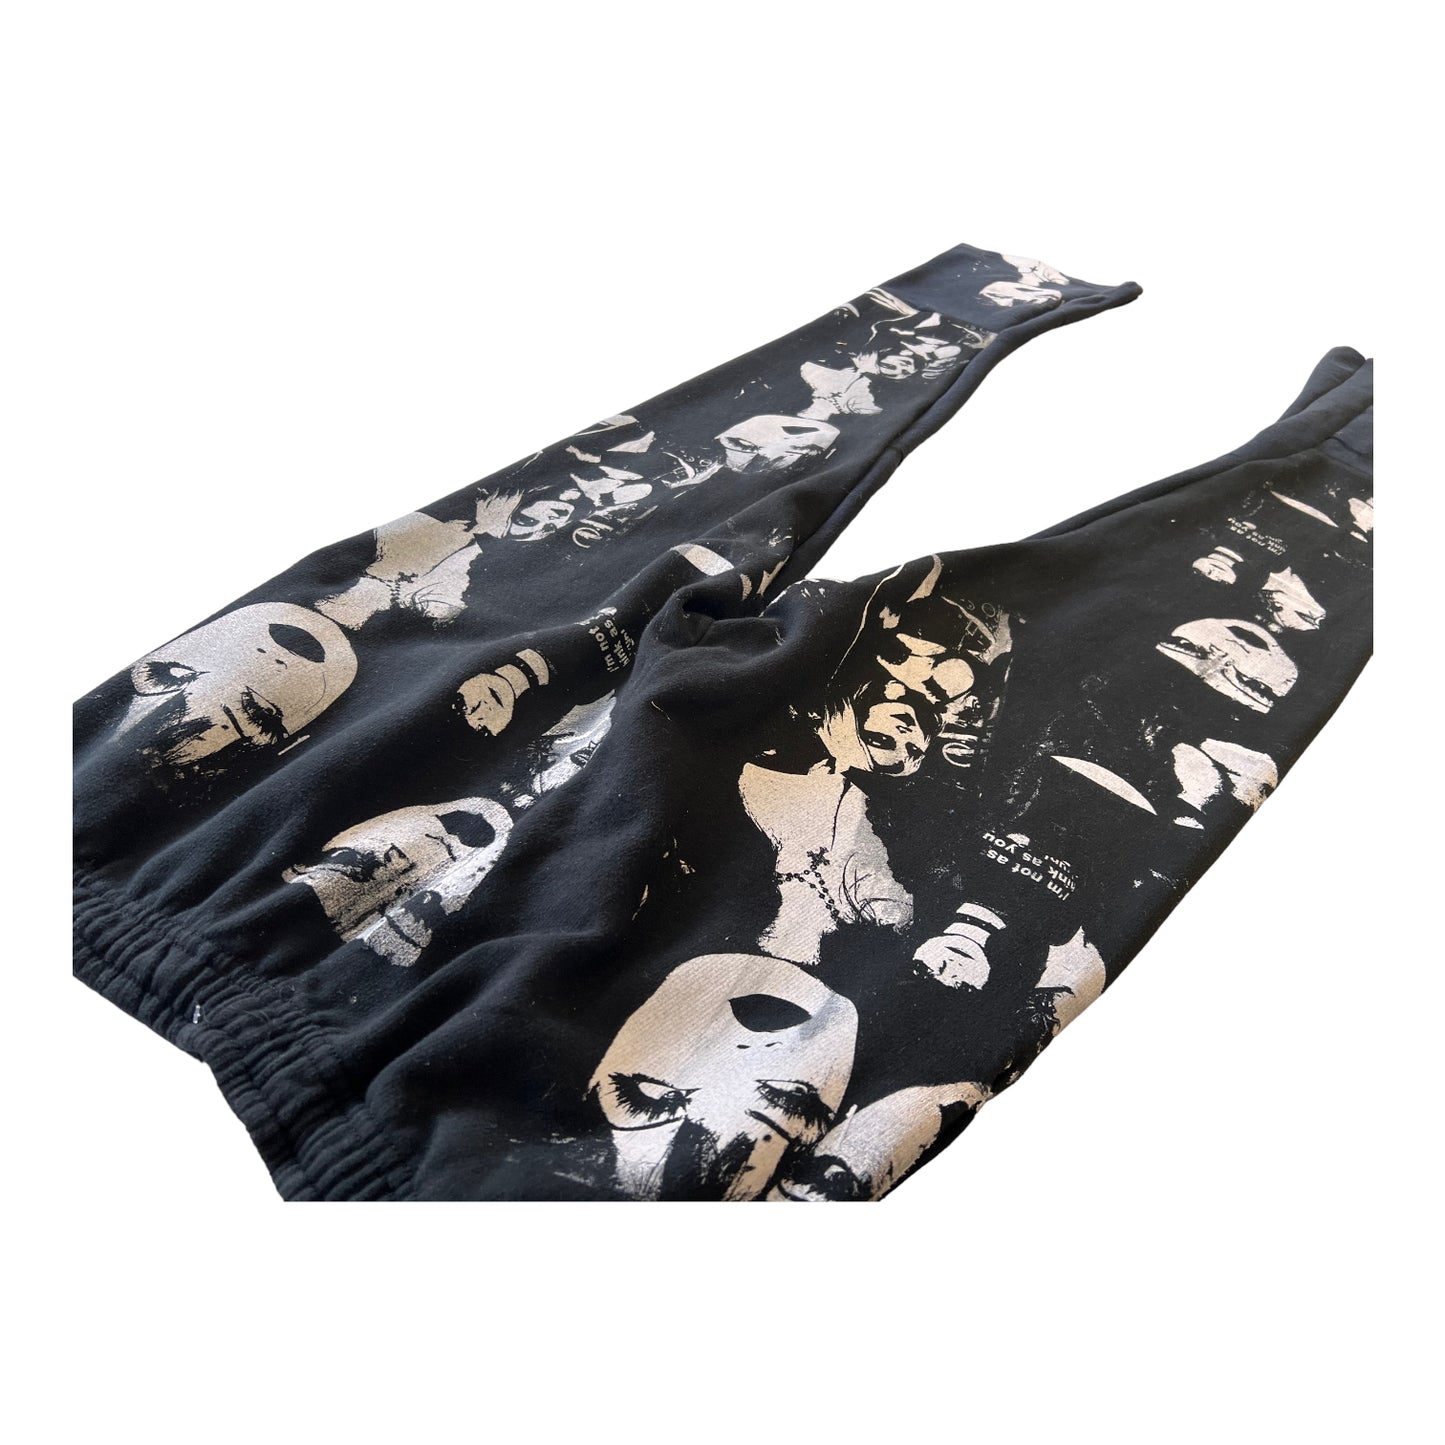 Toth 660 All over print Future Matriarch stacked flared joggers